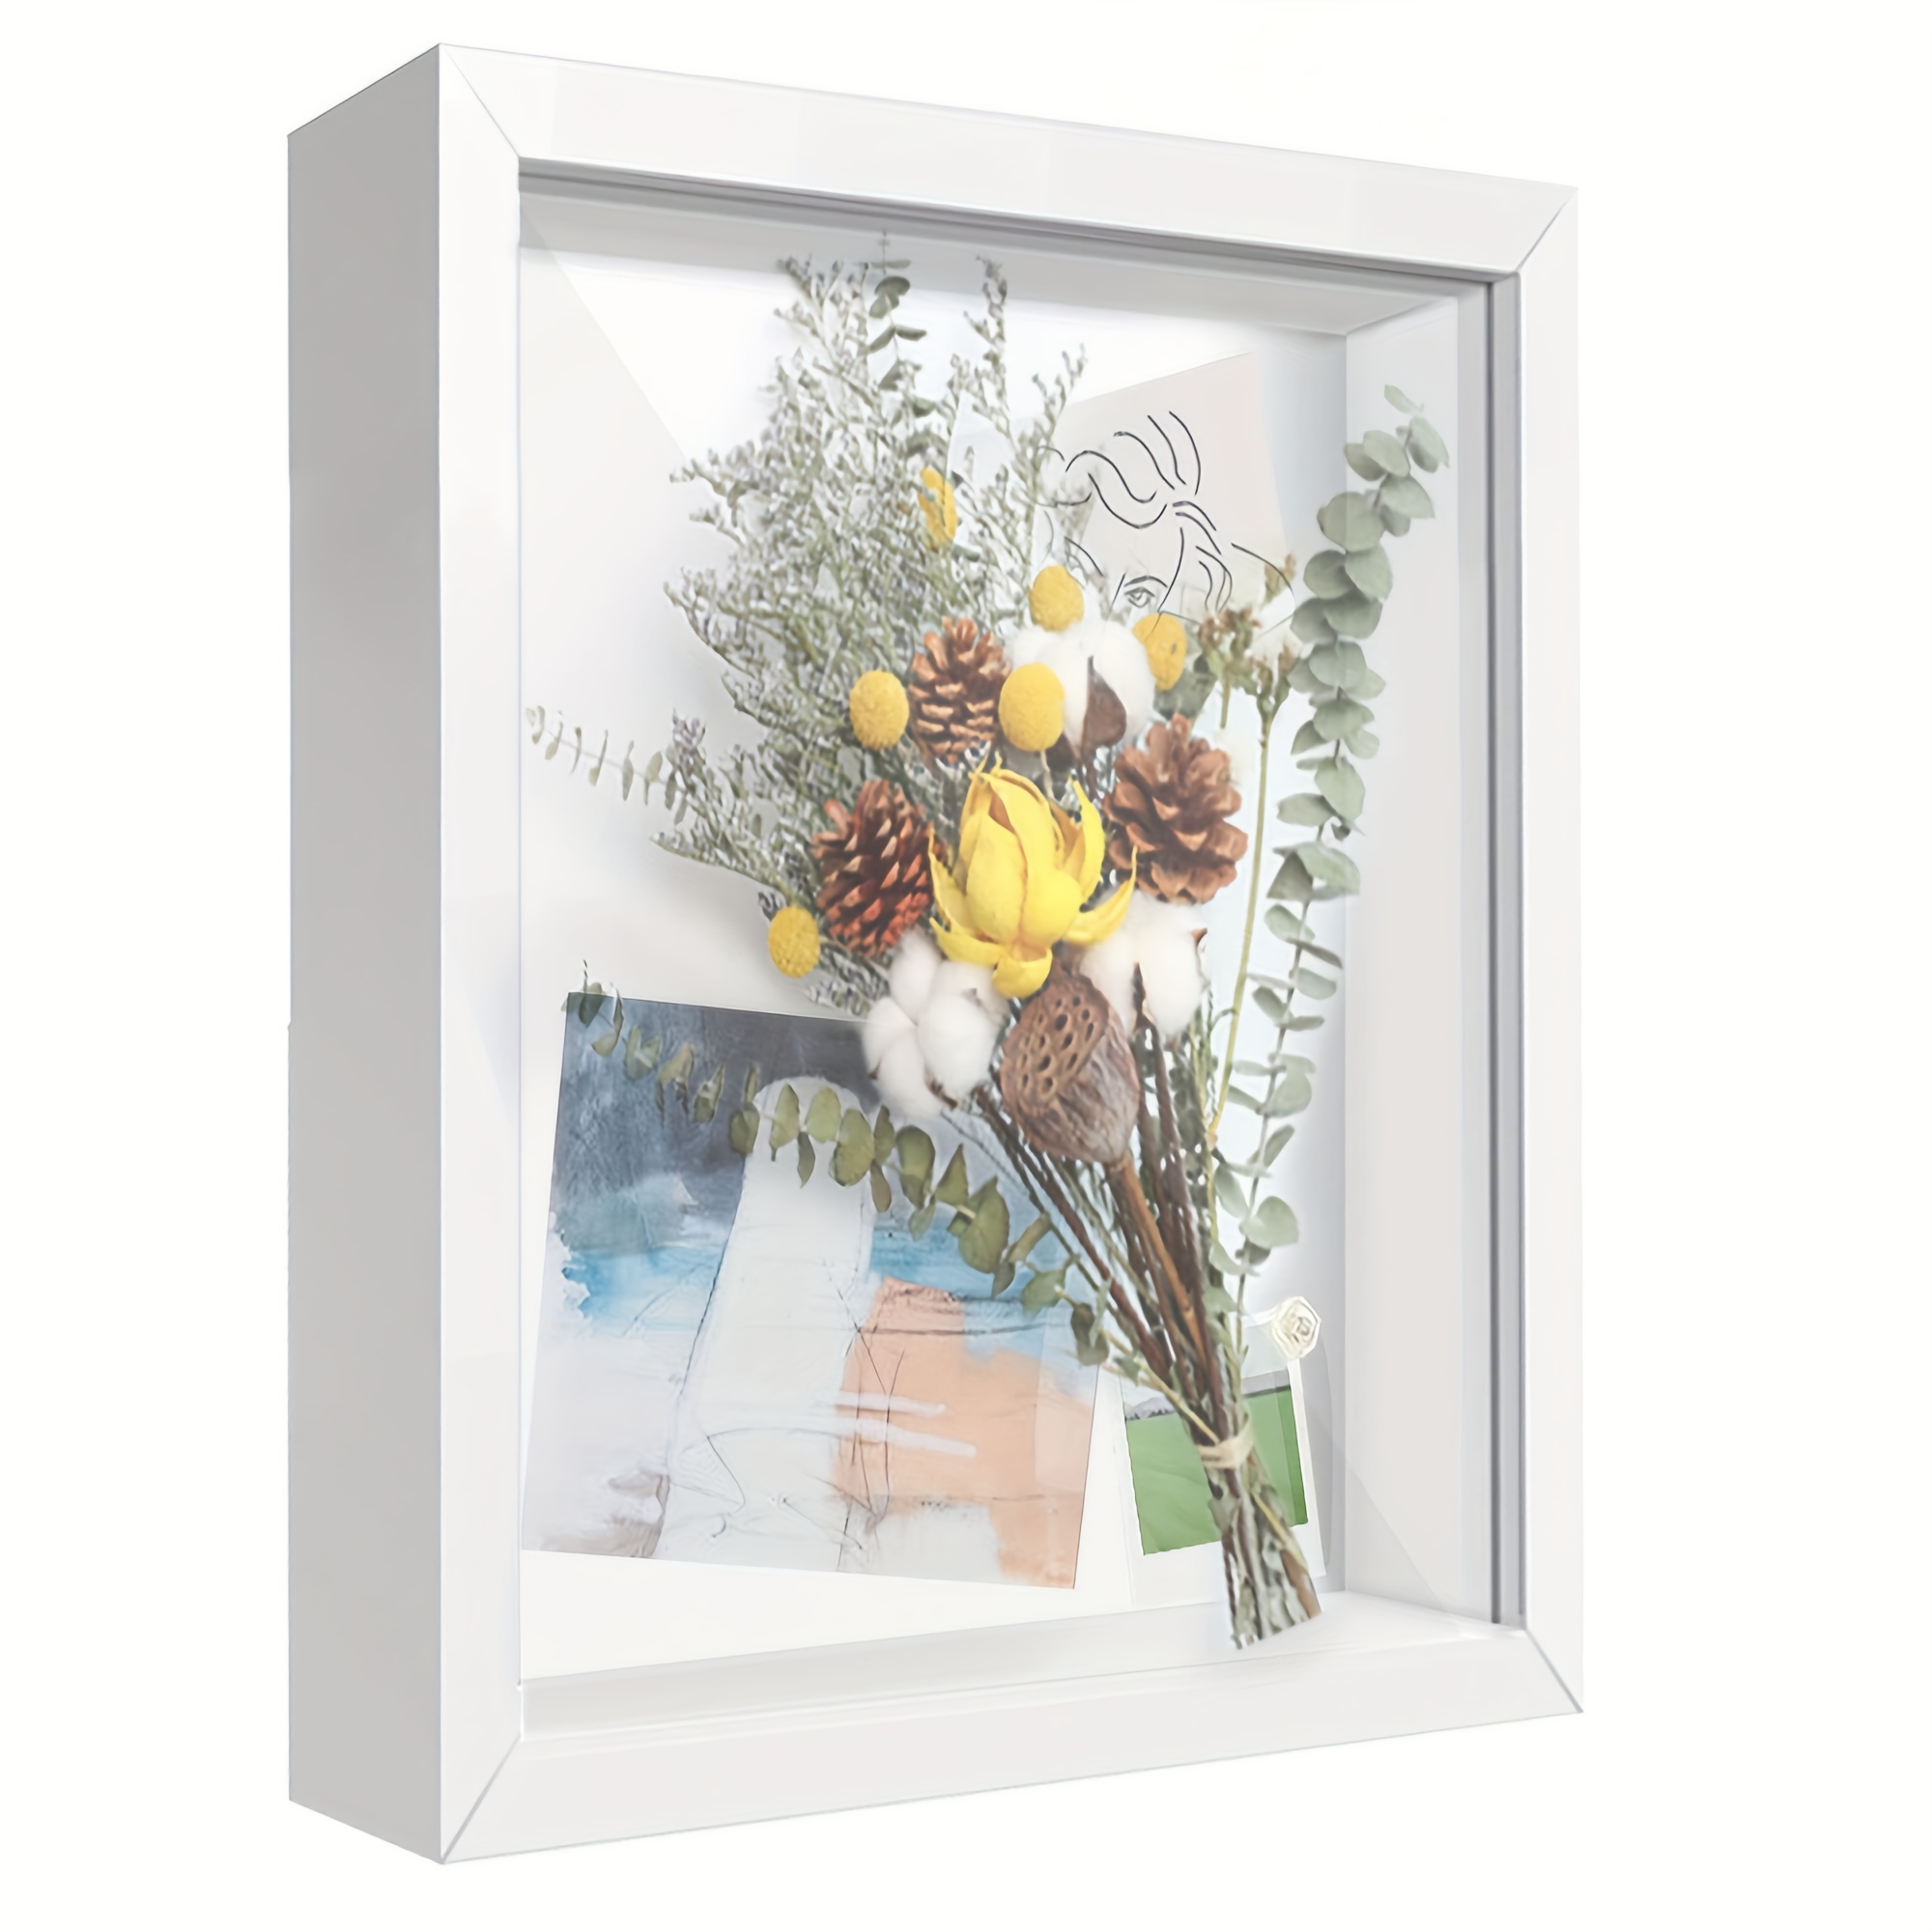 Wooden Adventure Archive Frame Box Wooden Photo Display Boxs